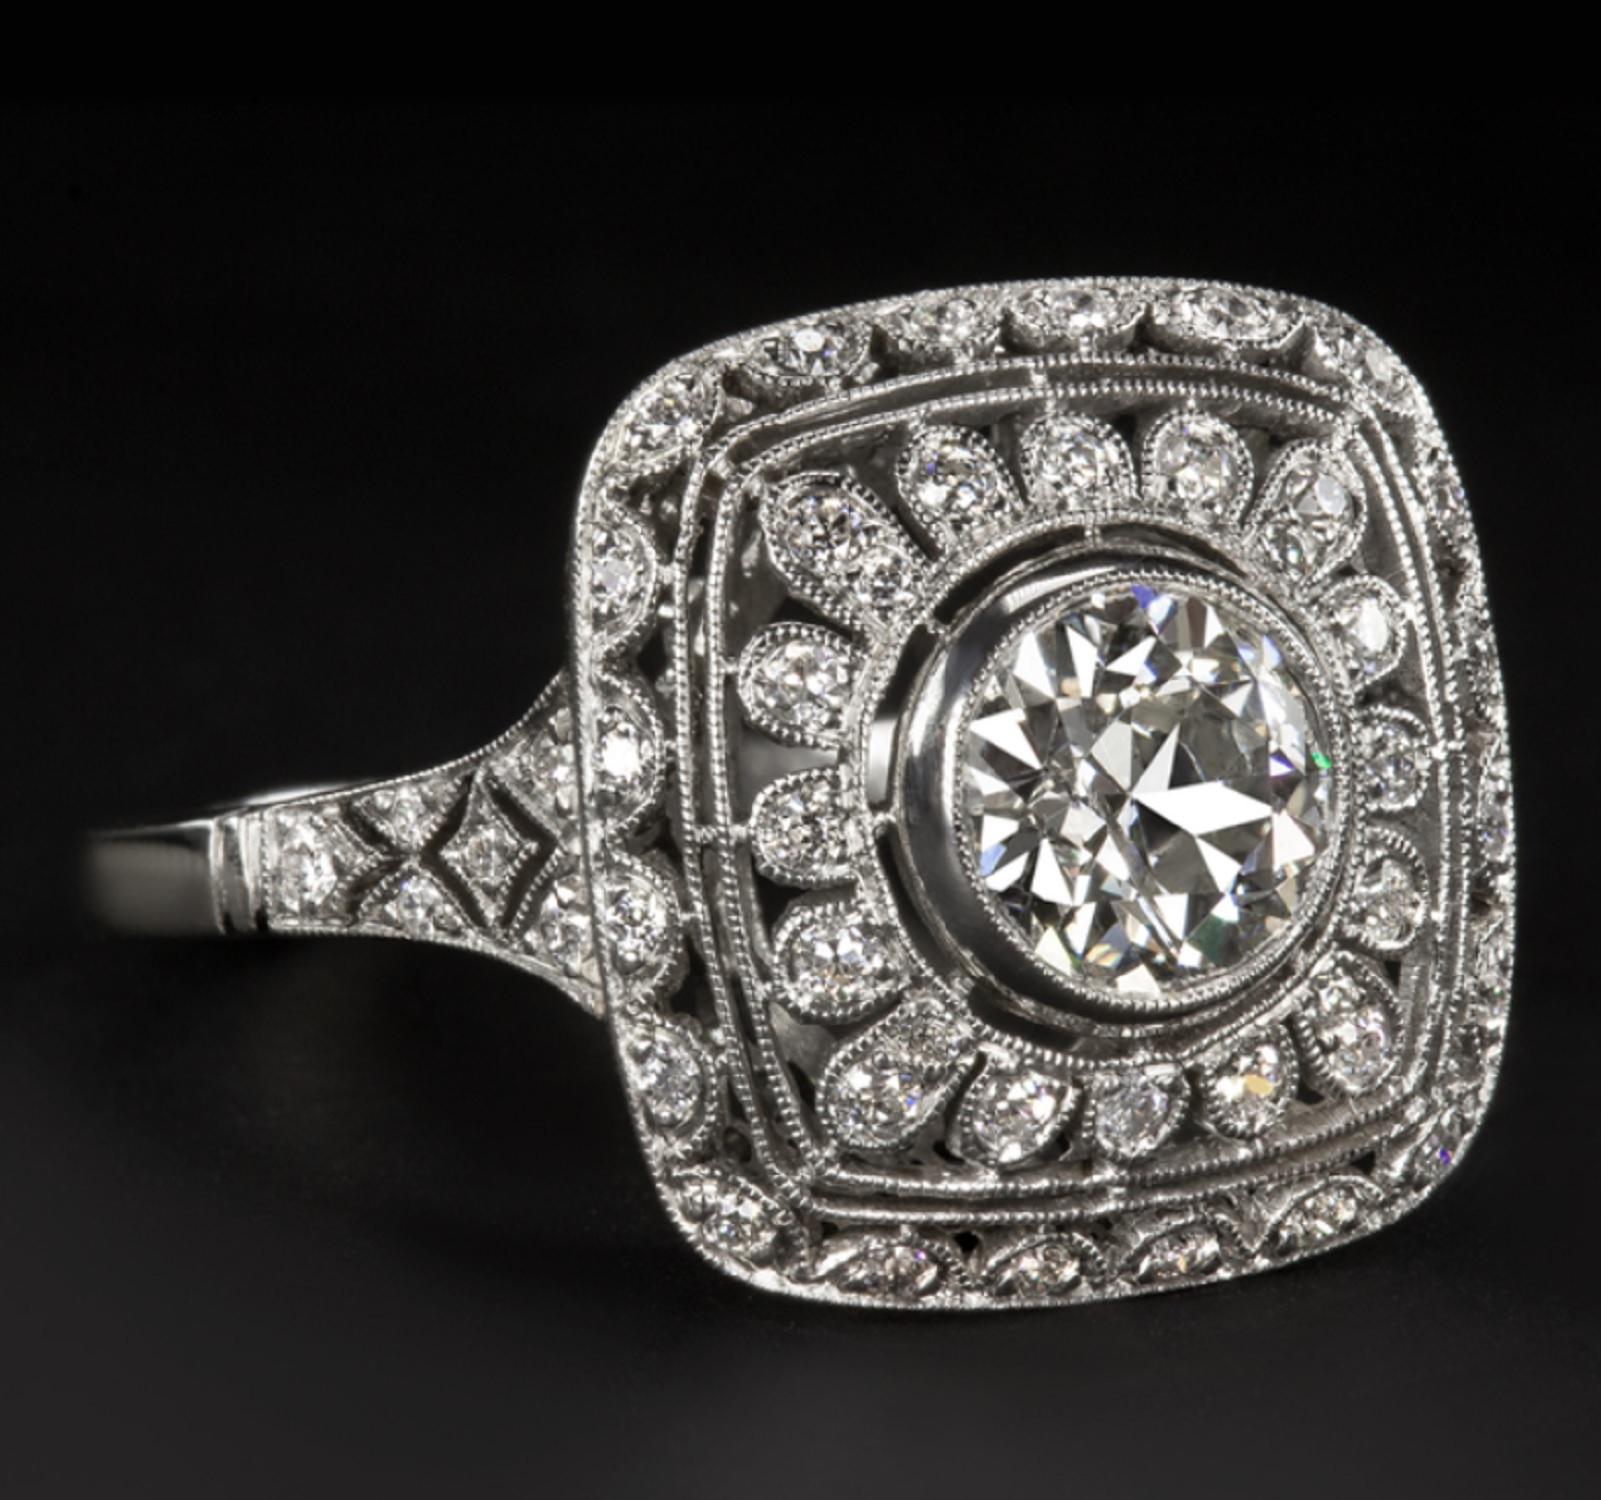 Exquisite diamond ring features a phenomenally brilliant 1 carat old European cut diamond center complemented by a richly detailed diamond encrusted platinum setting. Fiery, beautifully white, and 100% eye clean, the center diamond was cut by hand a